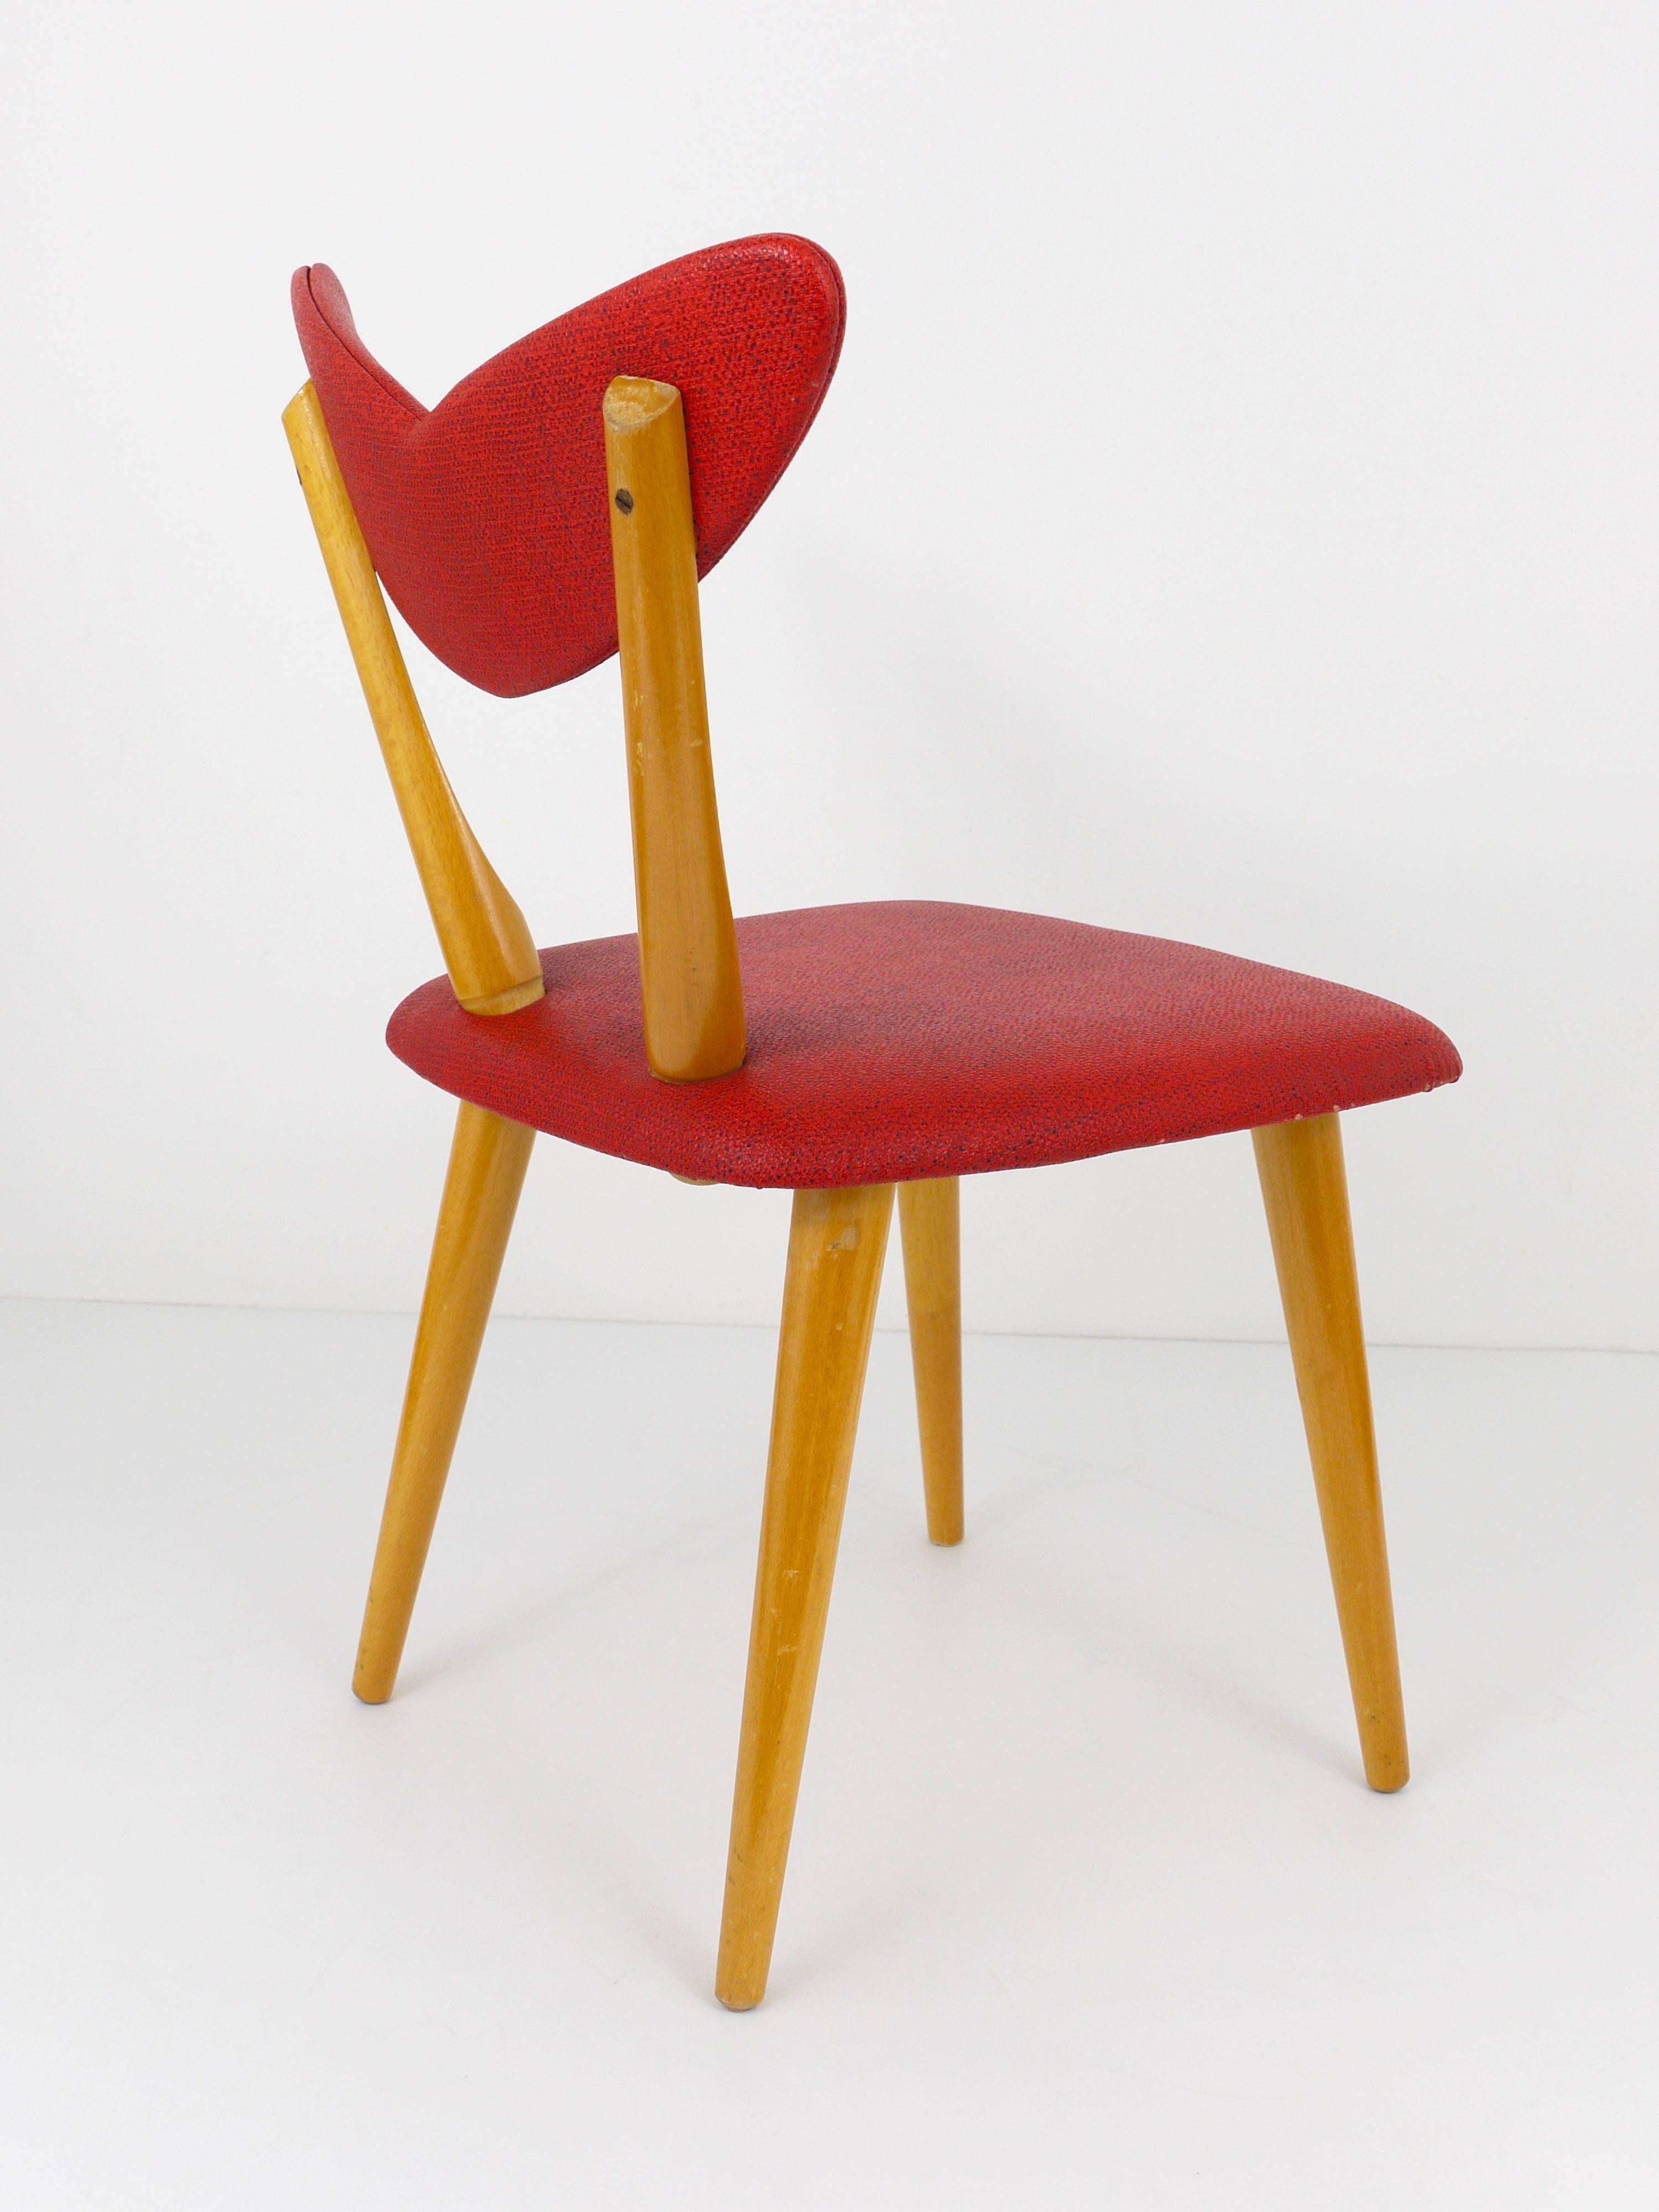 Red Heart Mid Century Modern Chair for Children,  Austria, 1950s For Sale 2